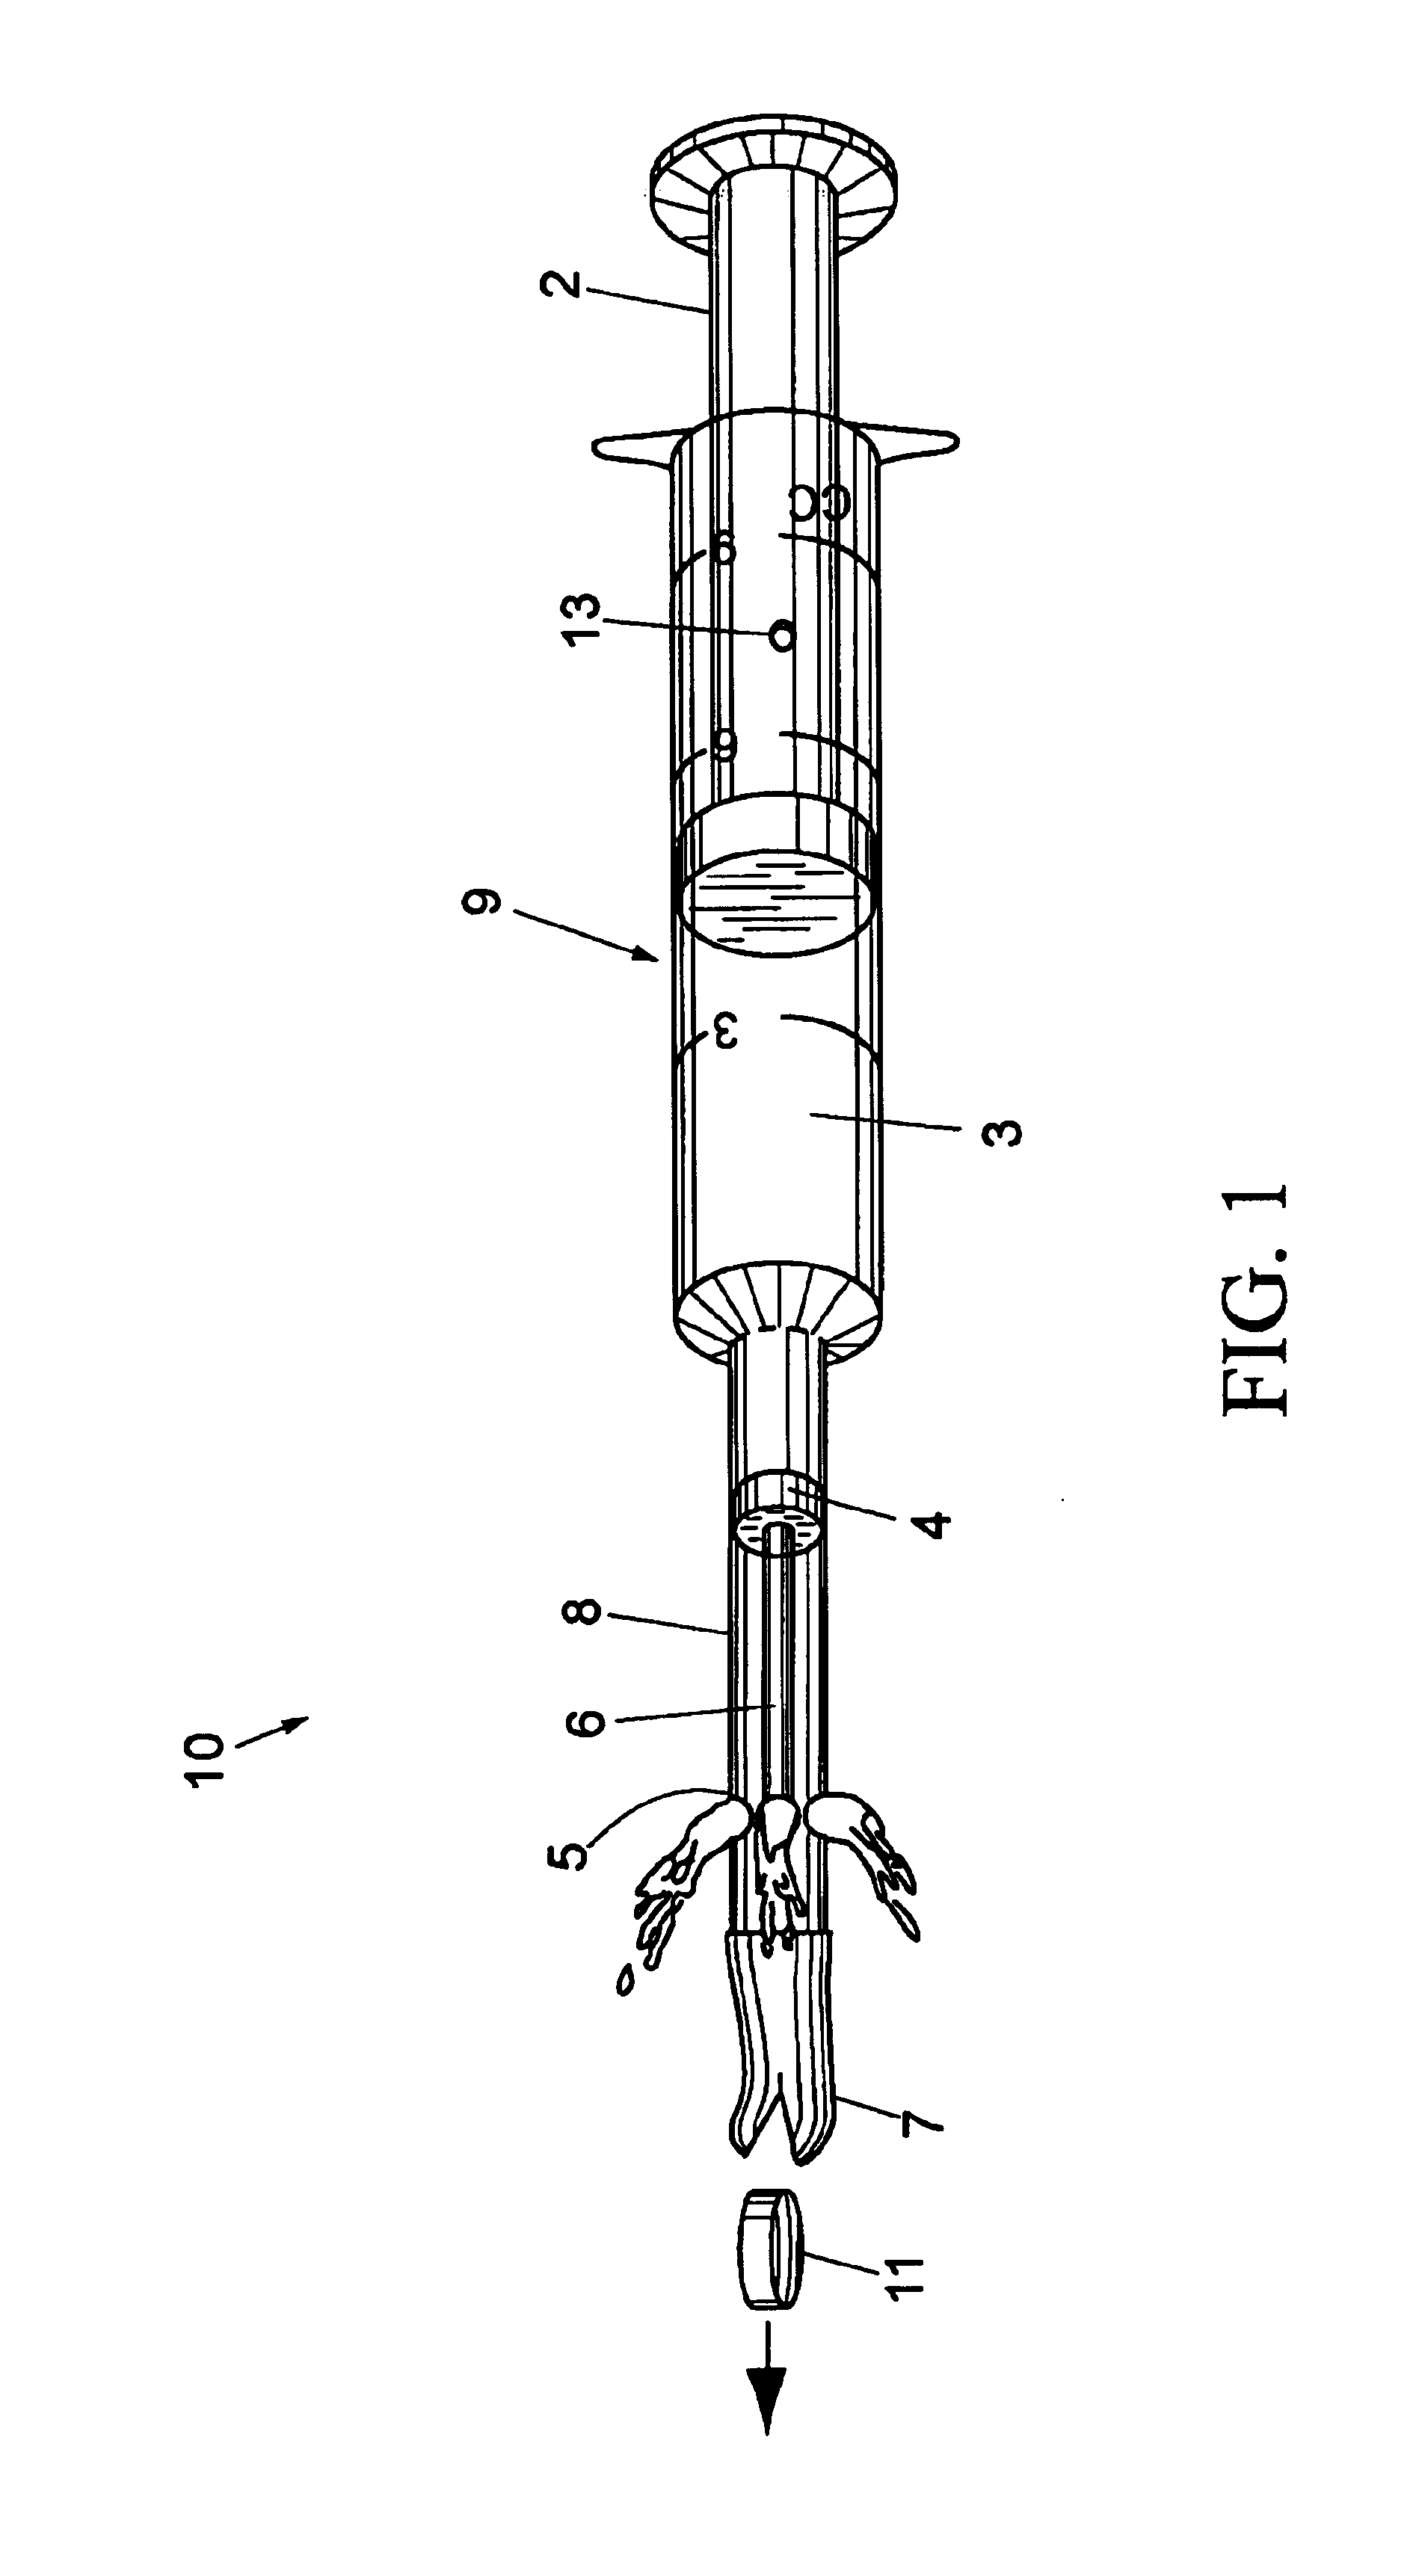 Veterinary pill and capsule delivery device